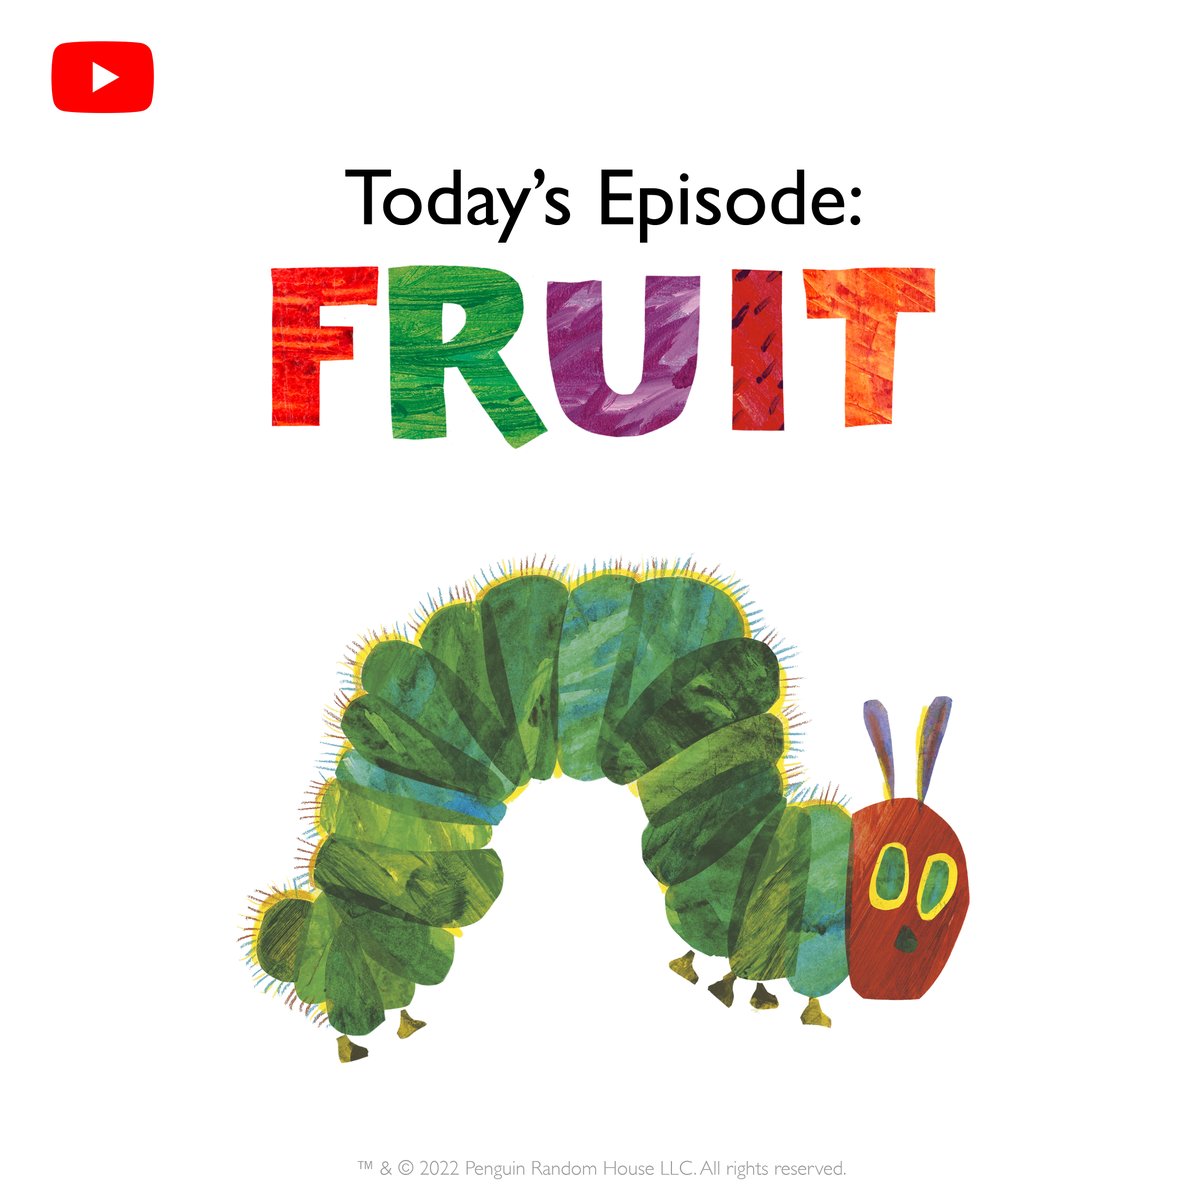 We are happy to share that our latest episode, FRUIT, is now ready to watch and enjoy. Today’s episode features a full read aloud of The Very Hungry Caterpillar. We hope you enjoy this very special episode featuring everyone’s favorite caterpillar. youtube.com/@WorldofEricCa…